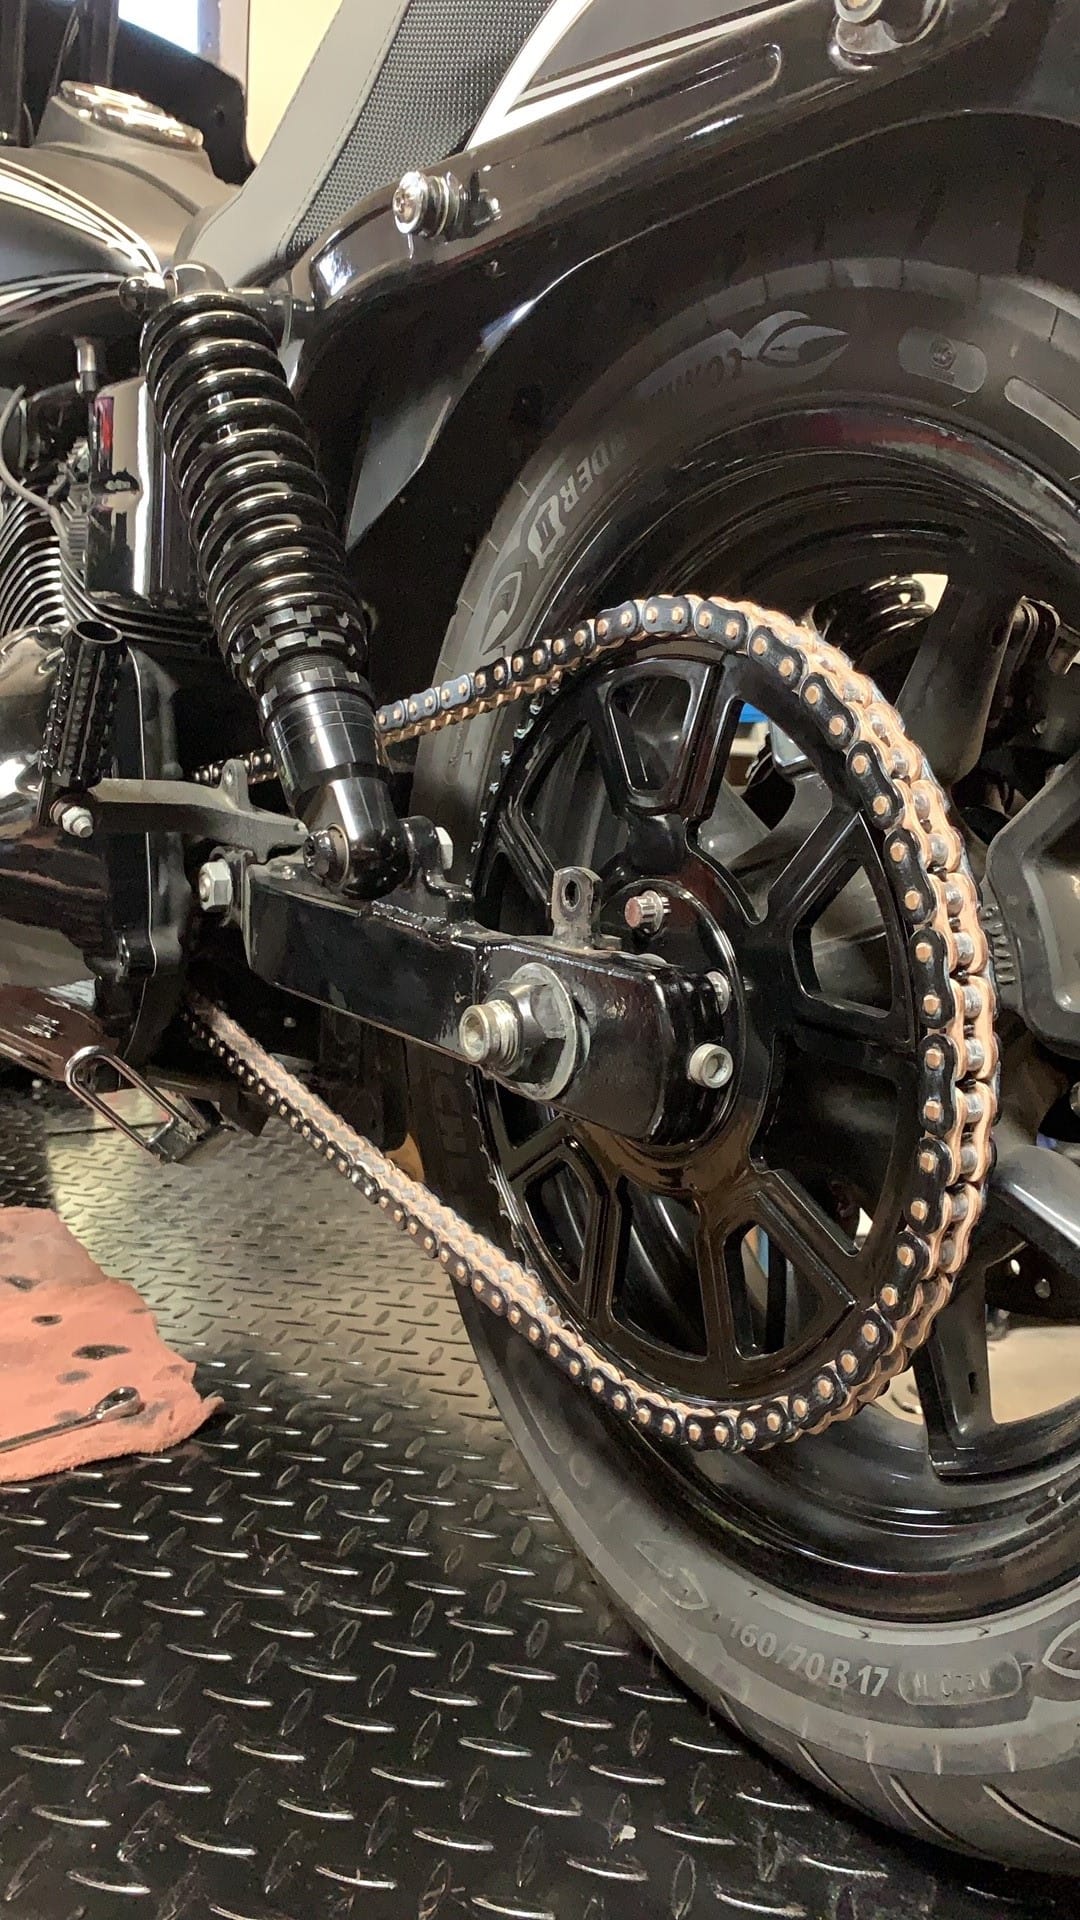 Fuel Moto Chain Drive Conversion Kit for Harley Davidson Touring Models, Build Series